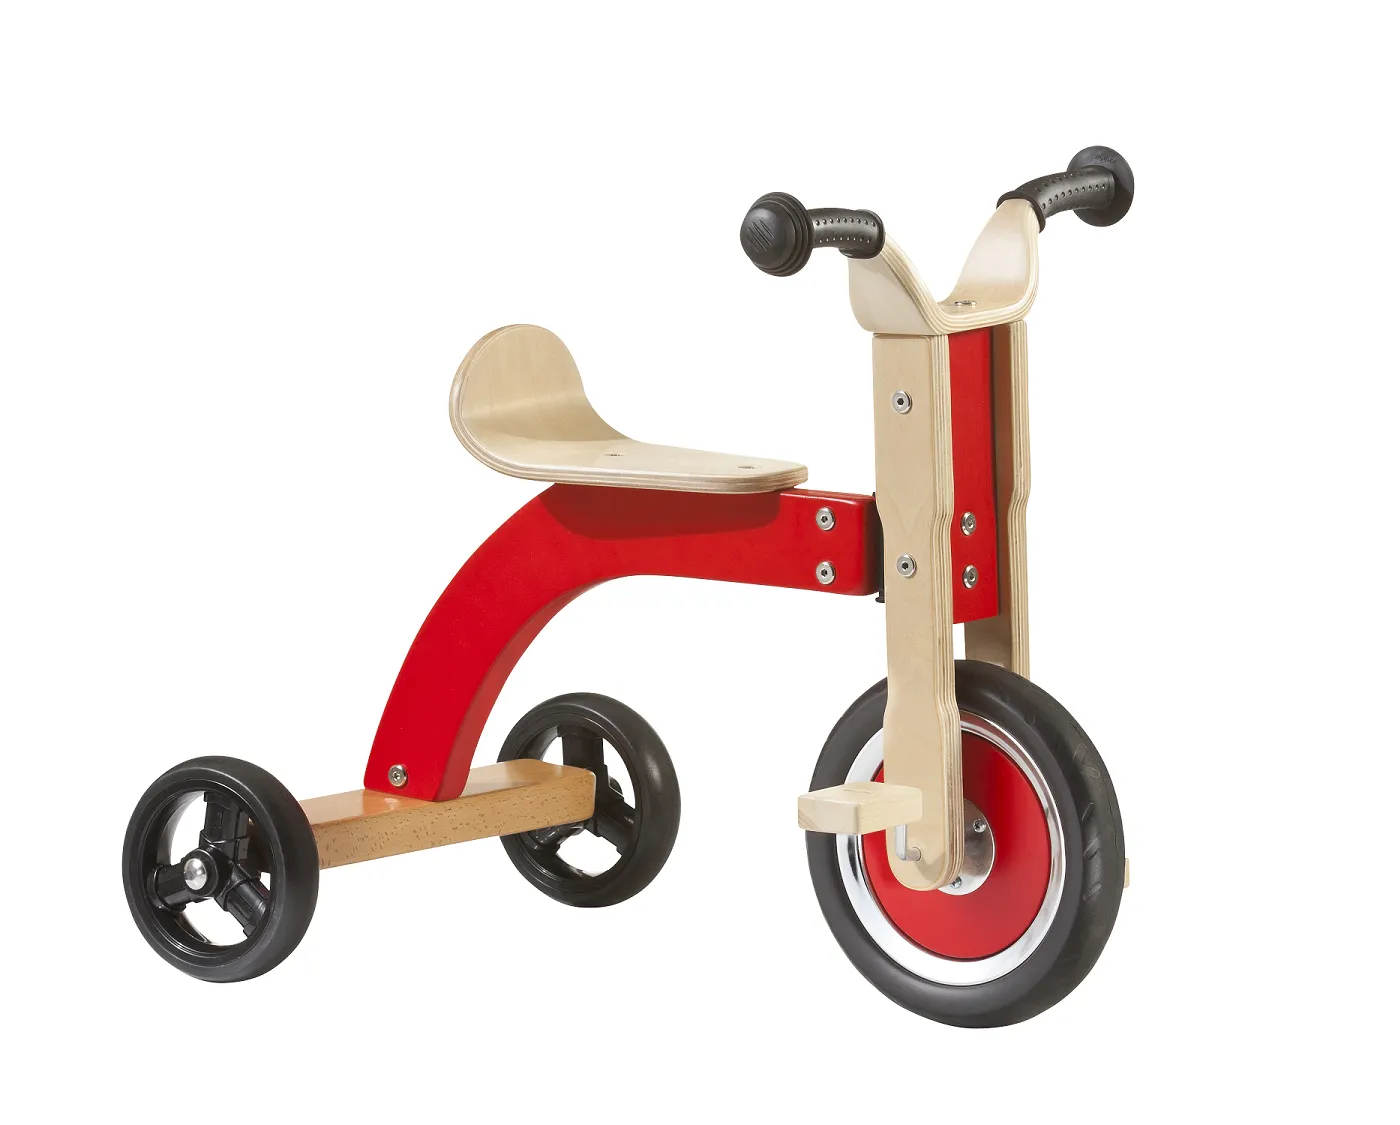 Wooden tricycle - Remainder